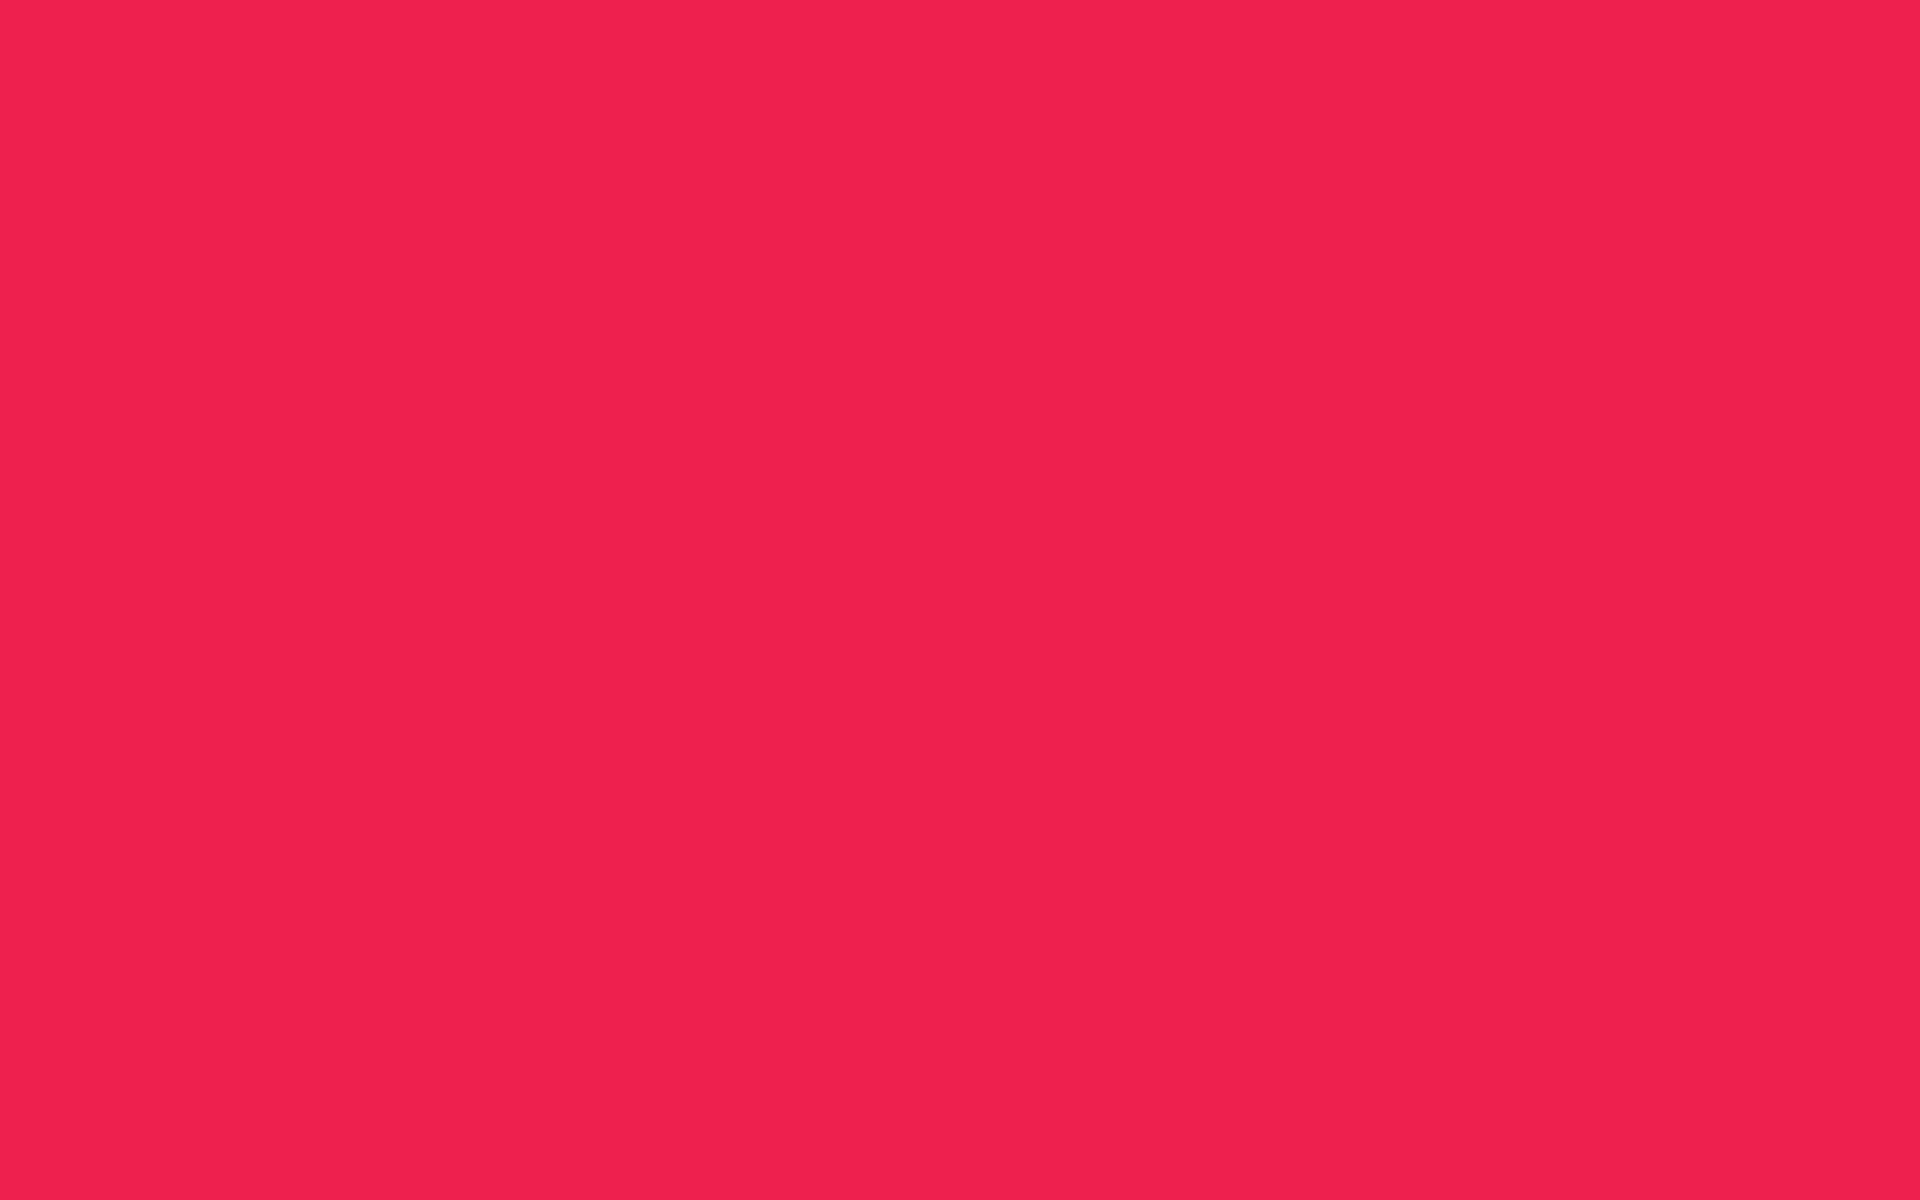 1920x1200 Red Crayola Solid Color Background